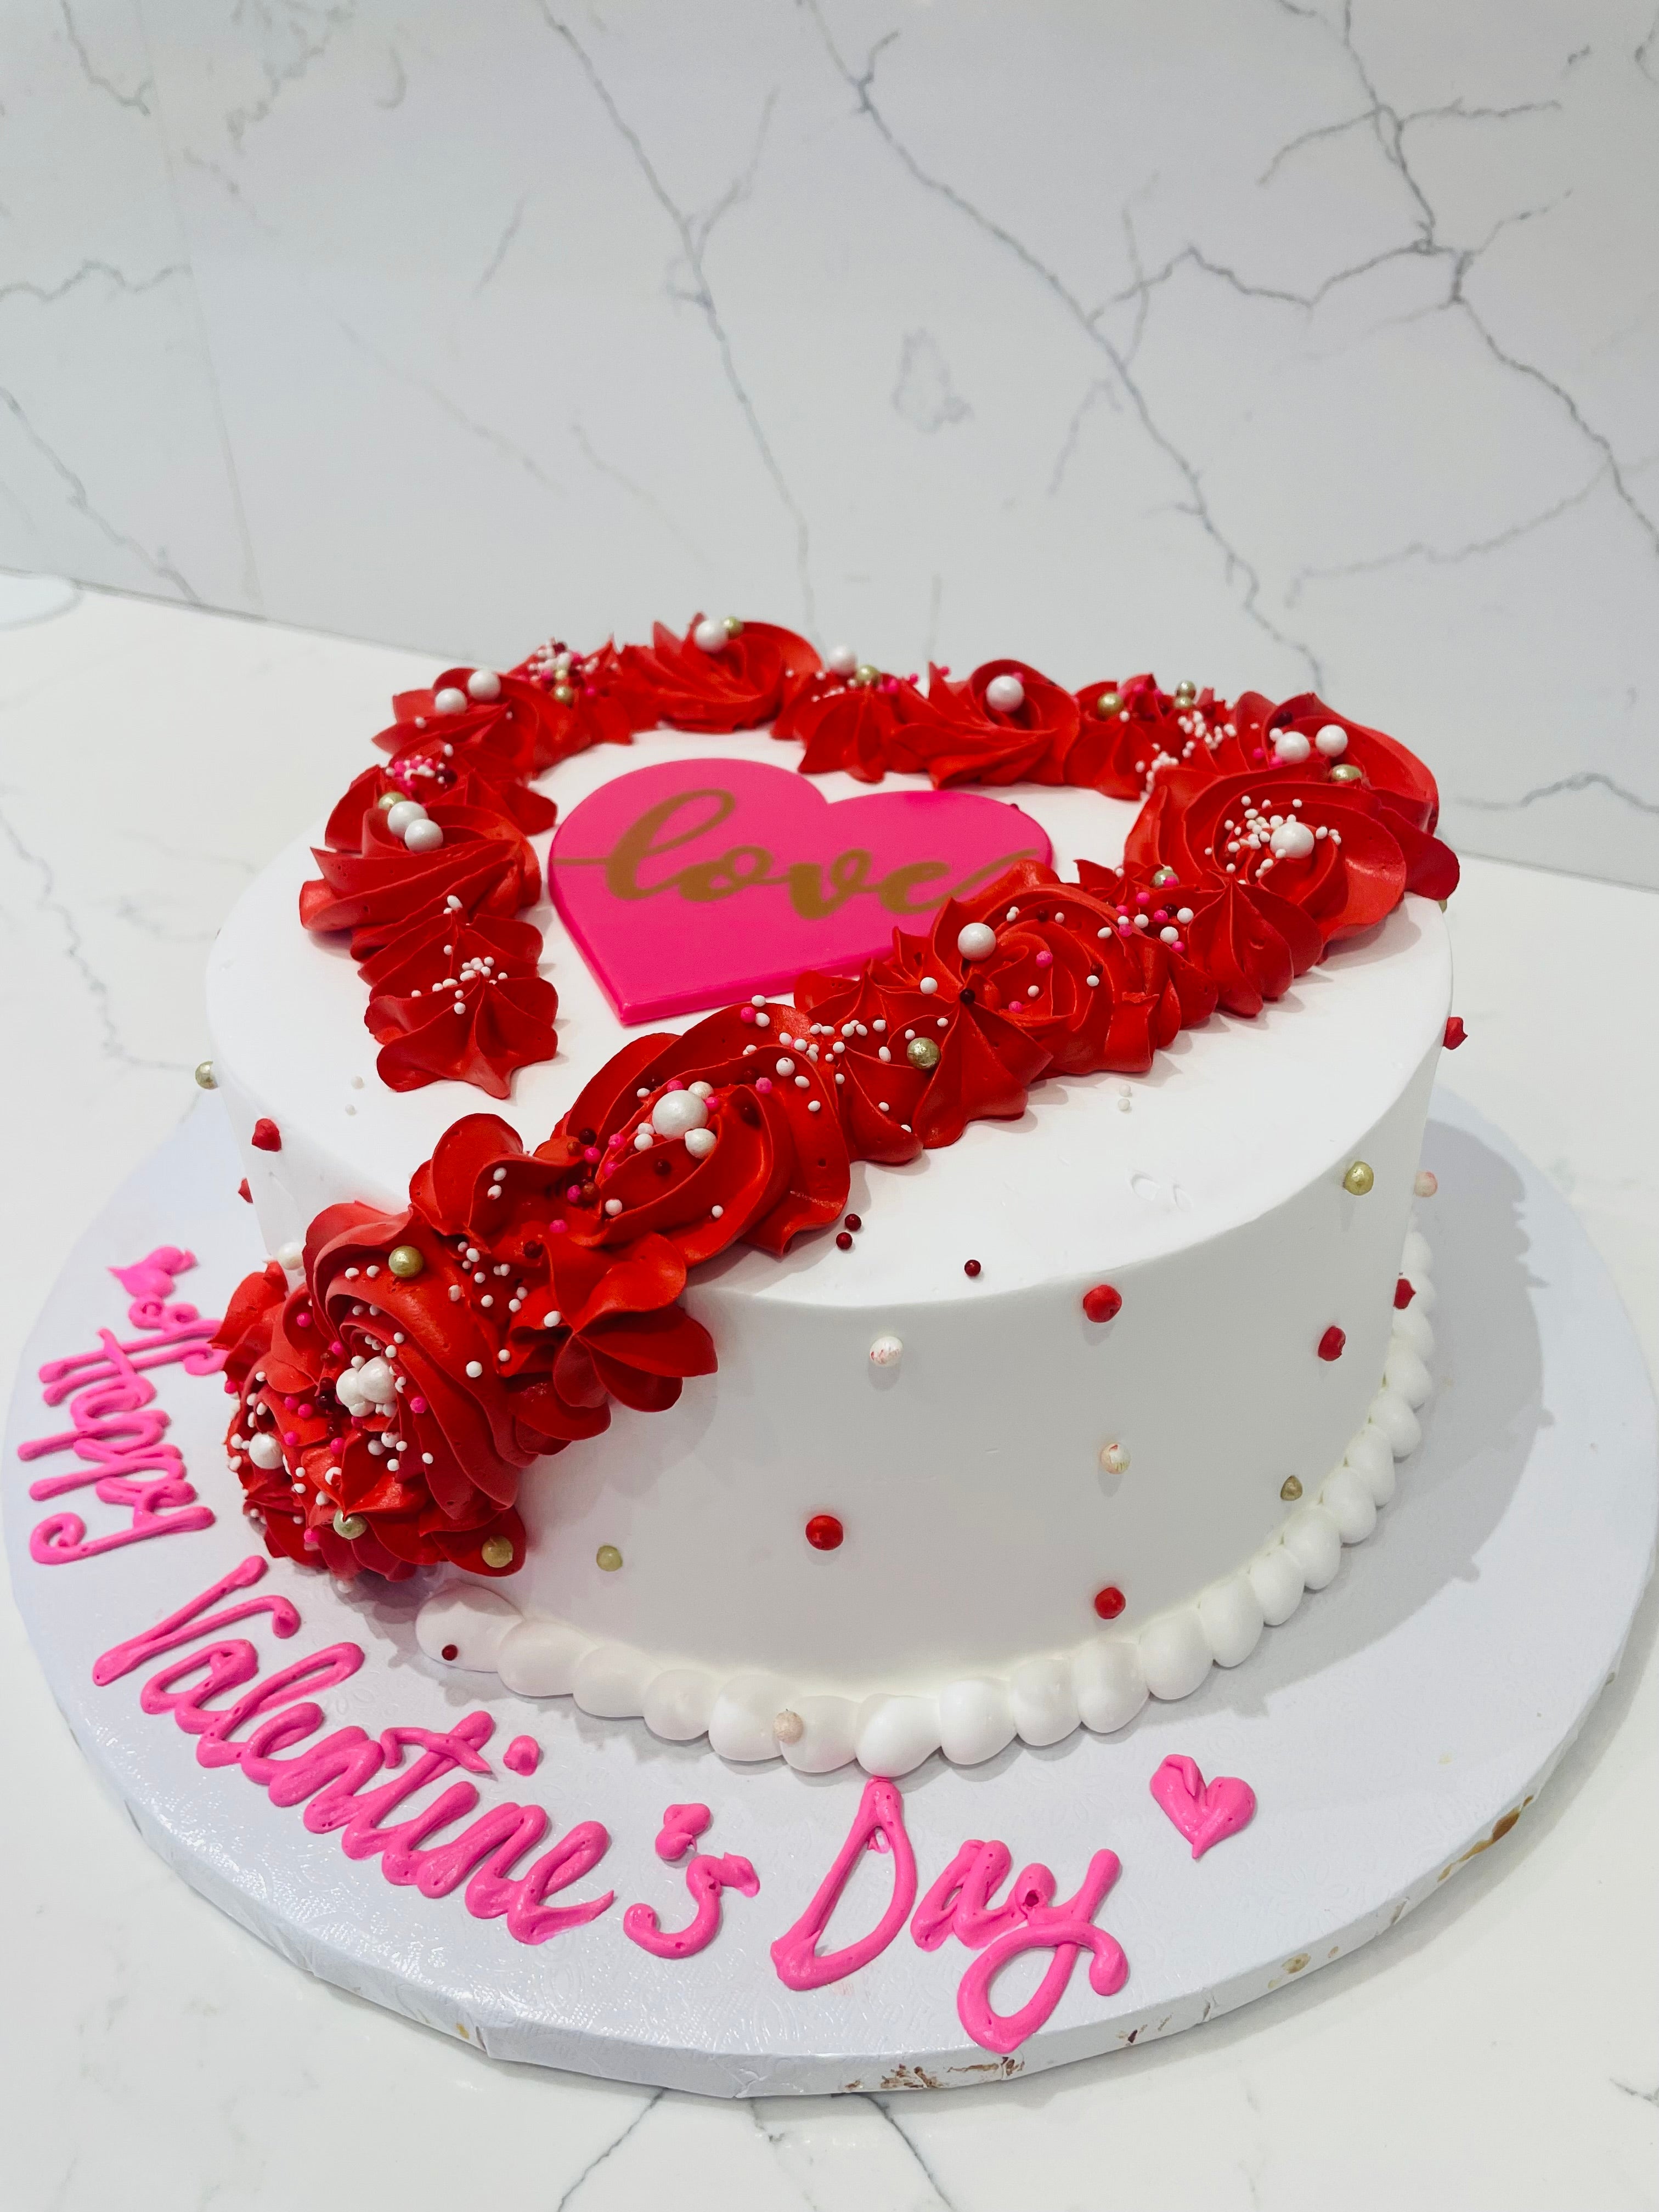 Romantic and Delicious Valentines Day Cakes | Gurgaon Bakers